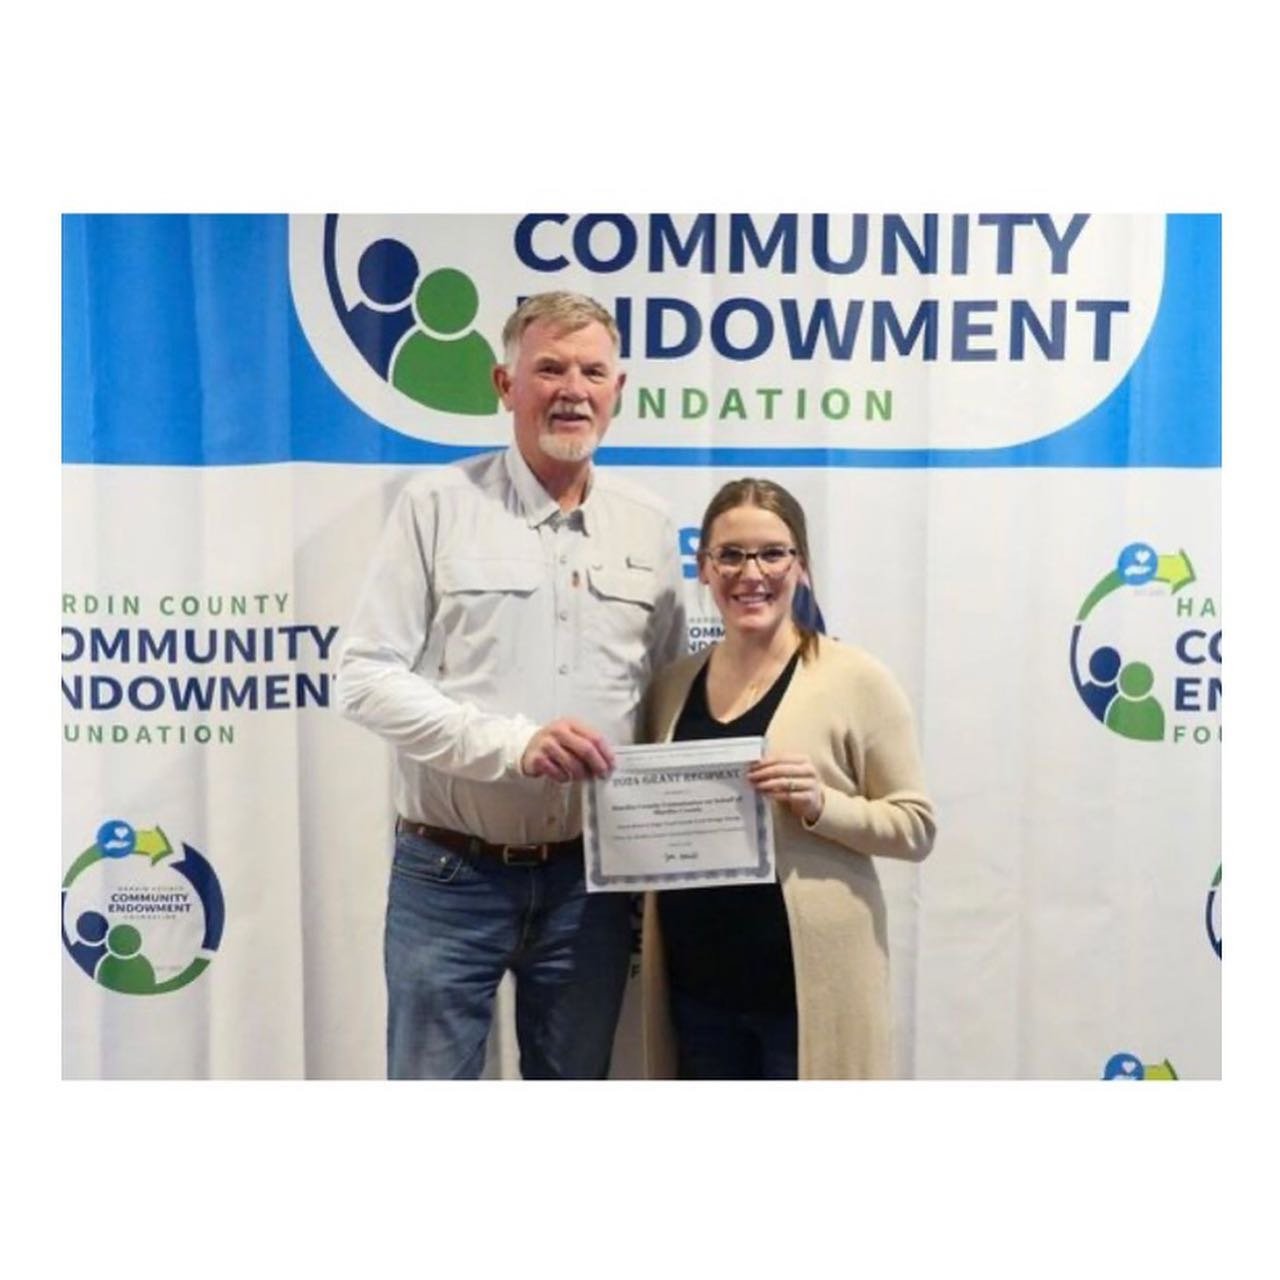 This past Thursday, River&rsquo;s Edge Trail board members, Steve Pence and Laura Carr, attended the Hardin County Community Endowment Fund Award Ceremony where the trail was awarded $15,000 to assist with a hydrological study of the South Fork Bridg